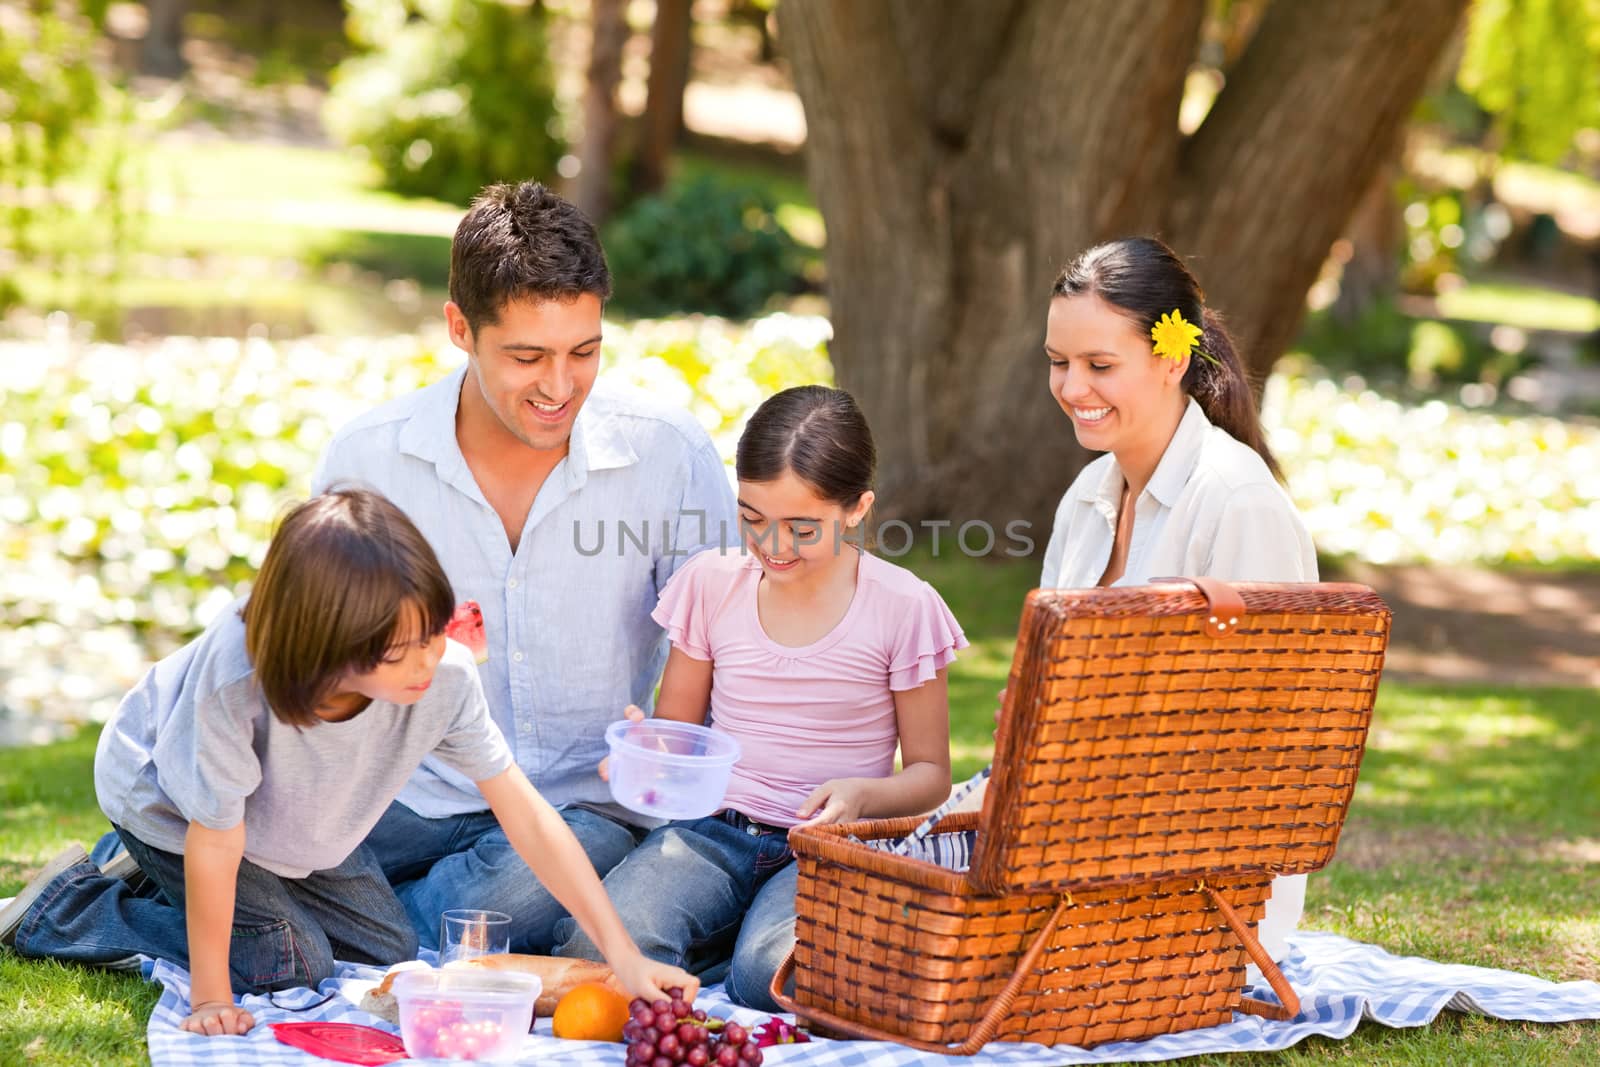 Lovely family picnicking in the park by Wavebreakmedia